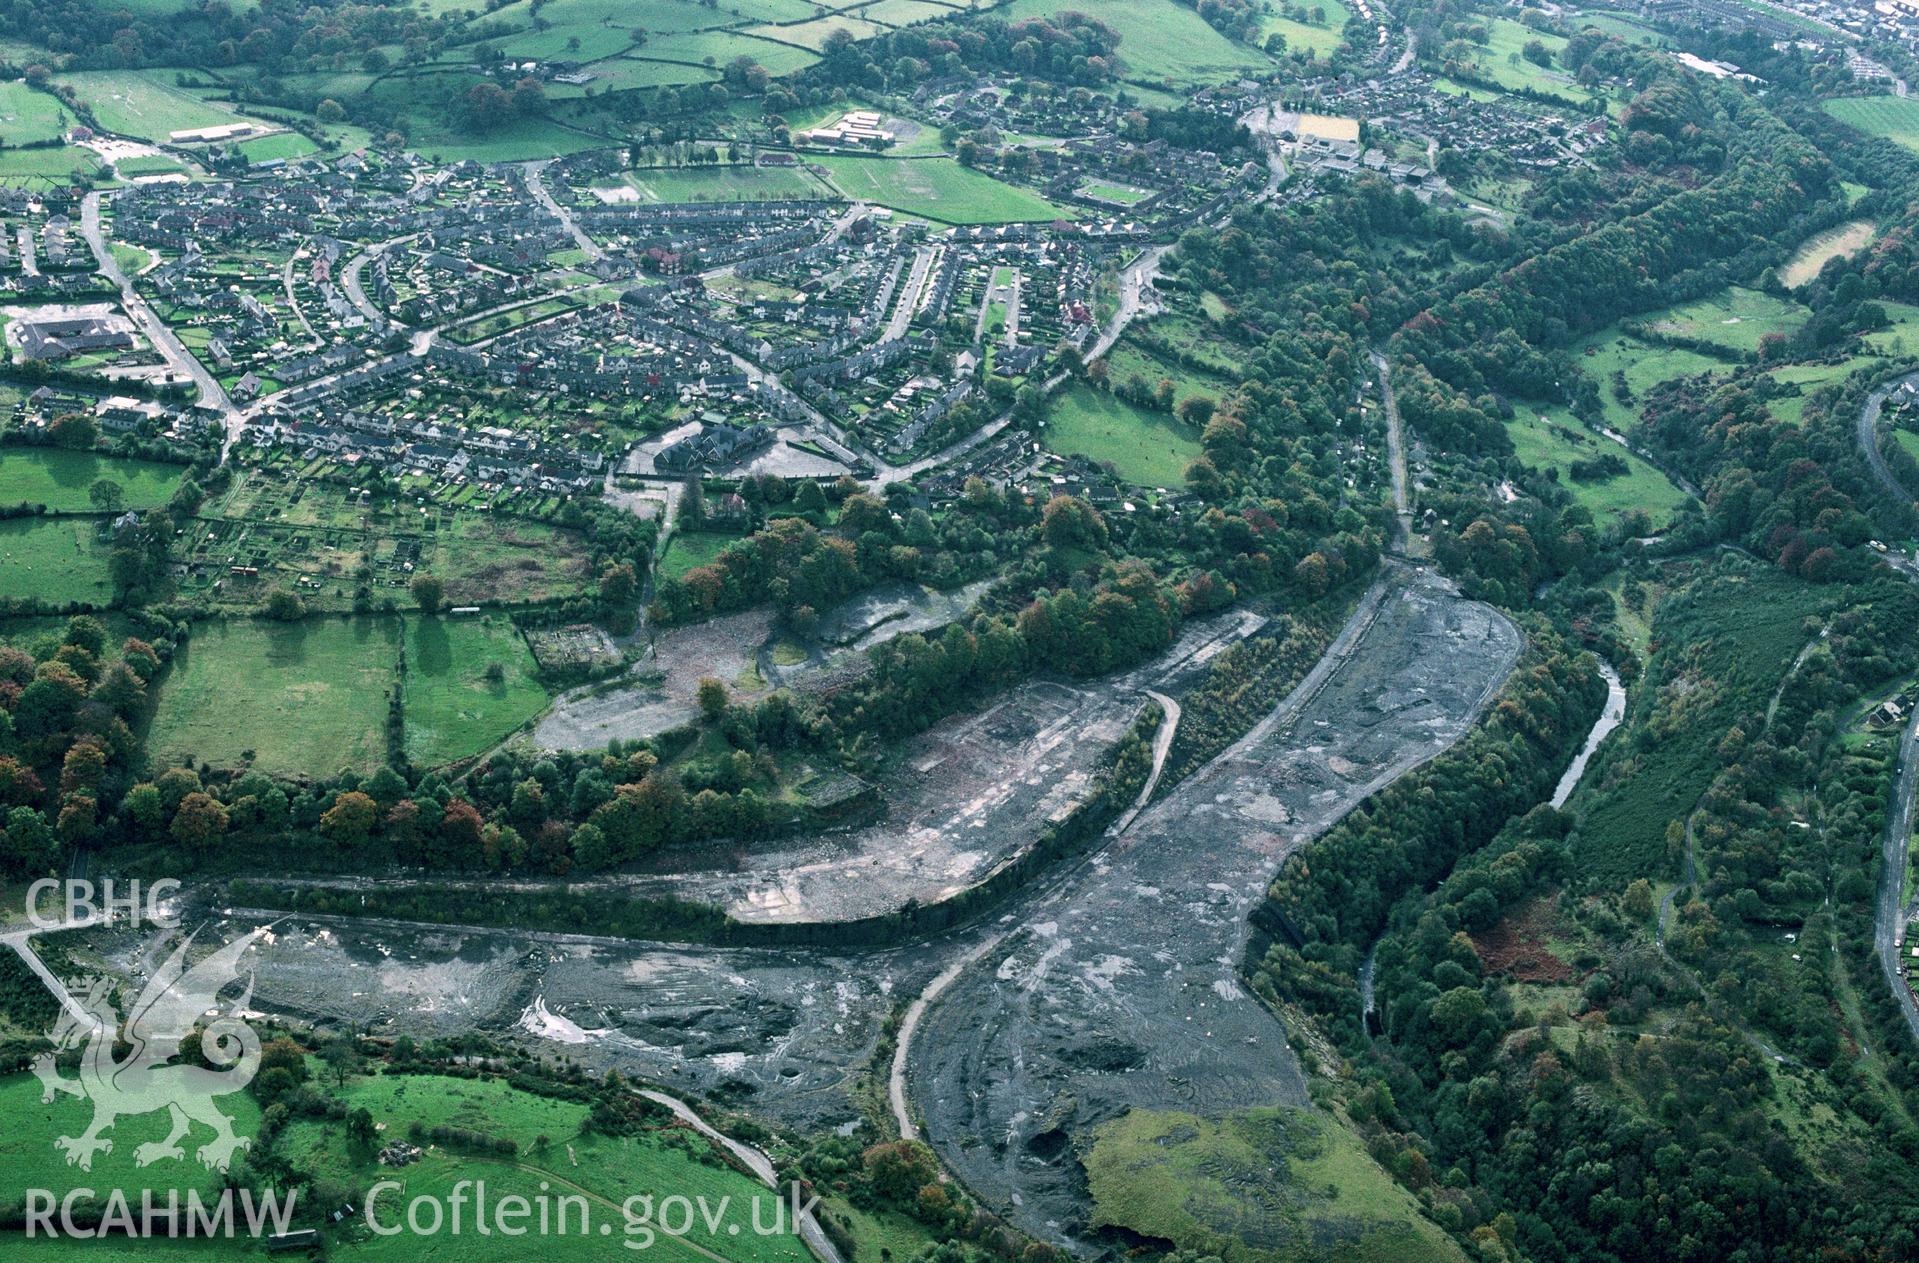 Slide of RCAHMW colour oblique aerial photograph of Oakdale Colliery, taken by C.R. Musson, 21/10/1992.